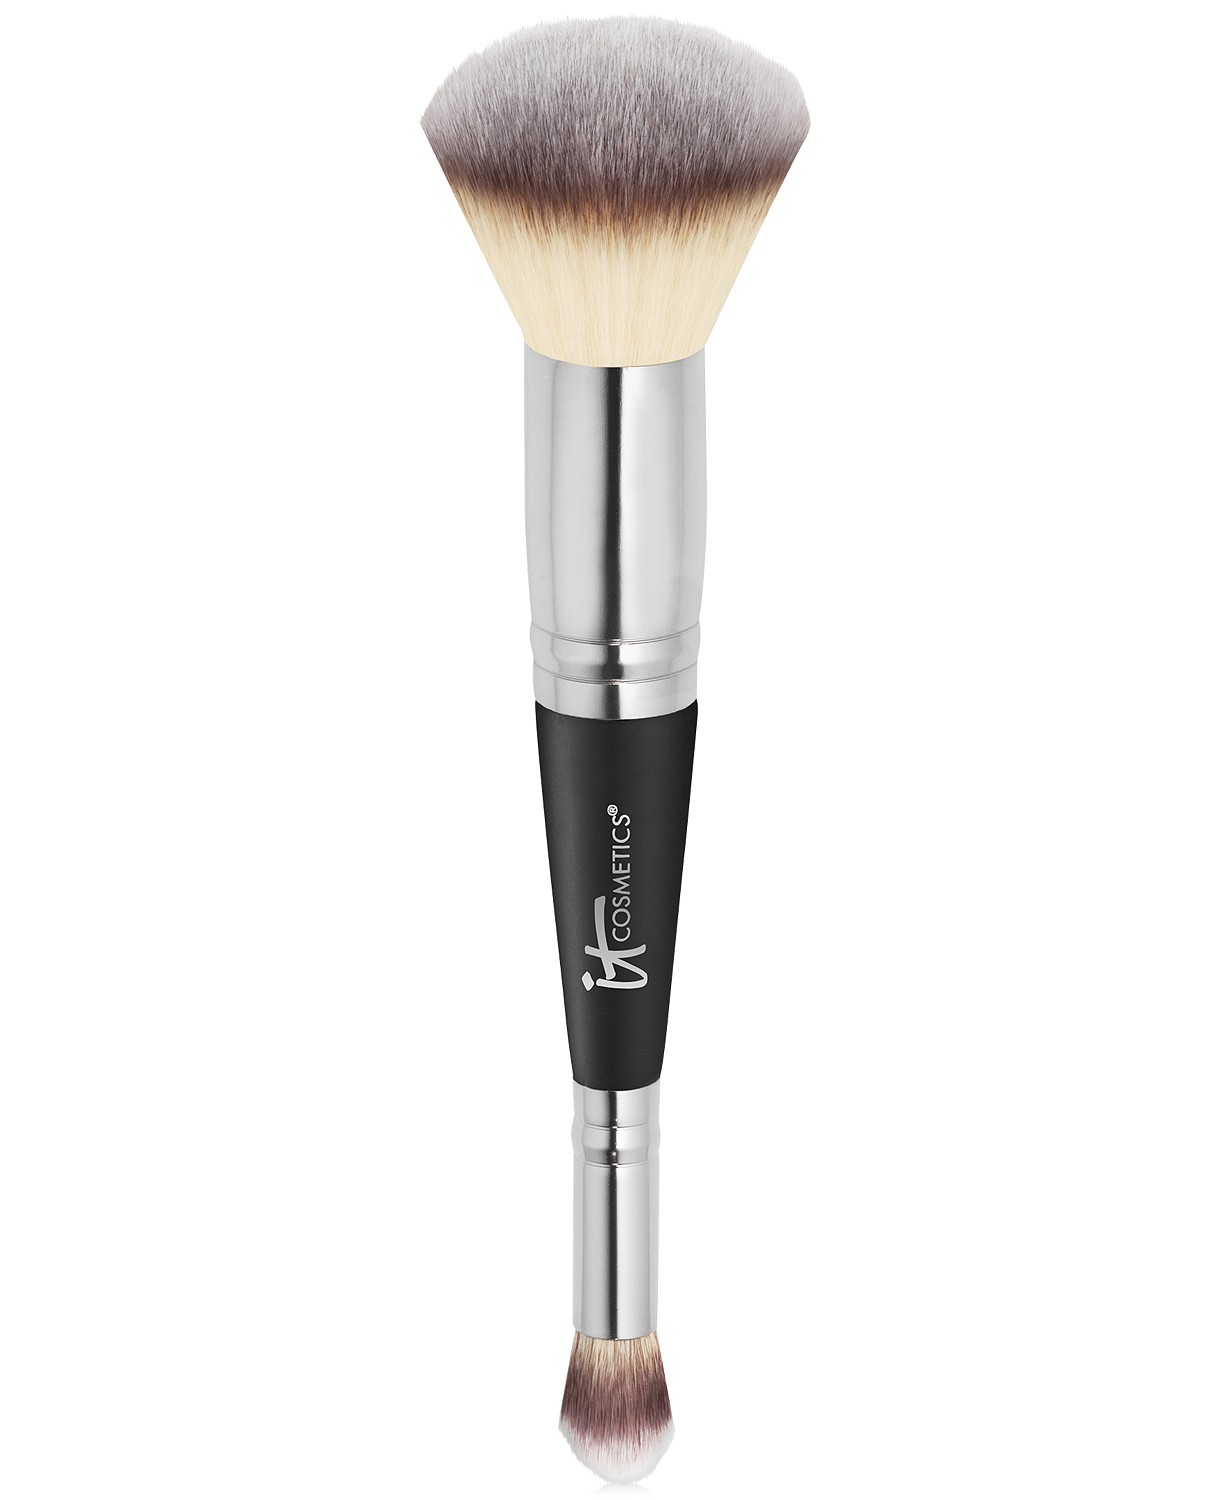 How to Clean Makeup Brushes - The New York Times